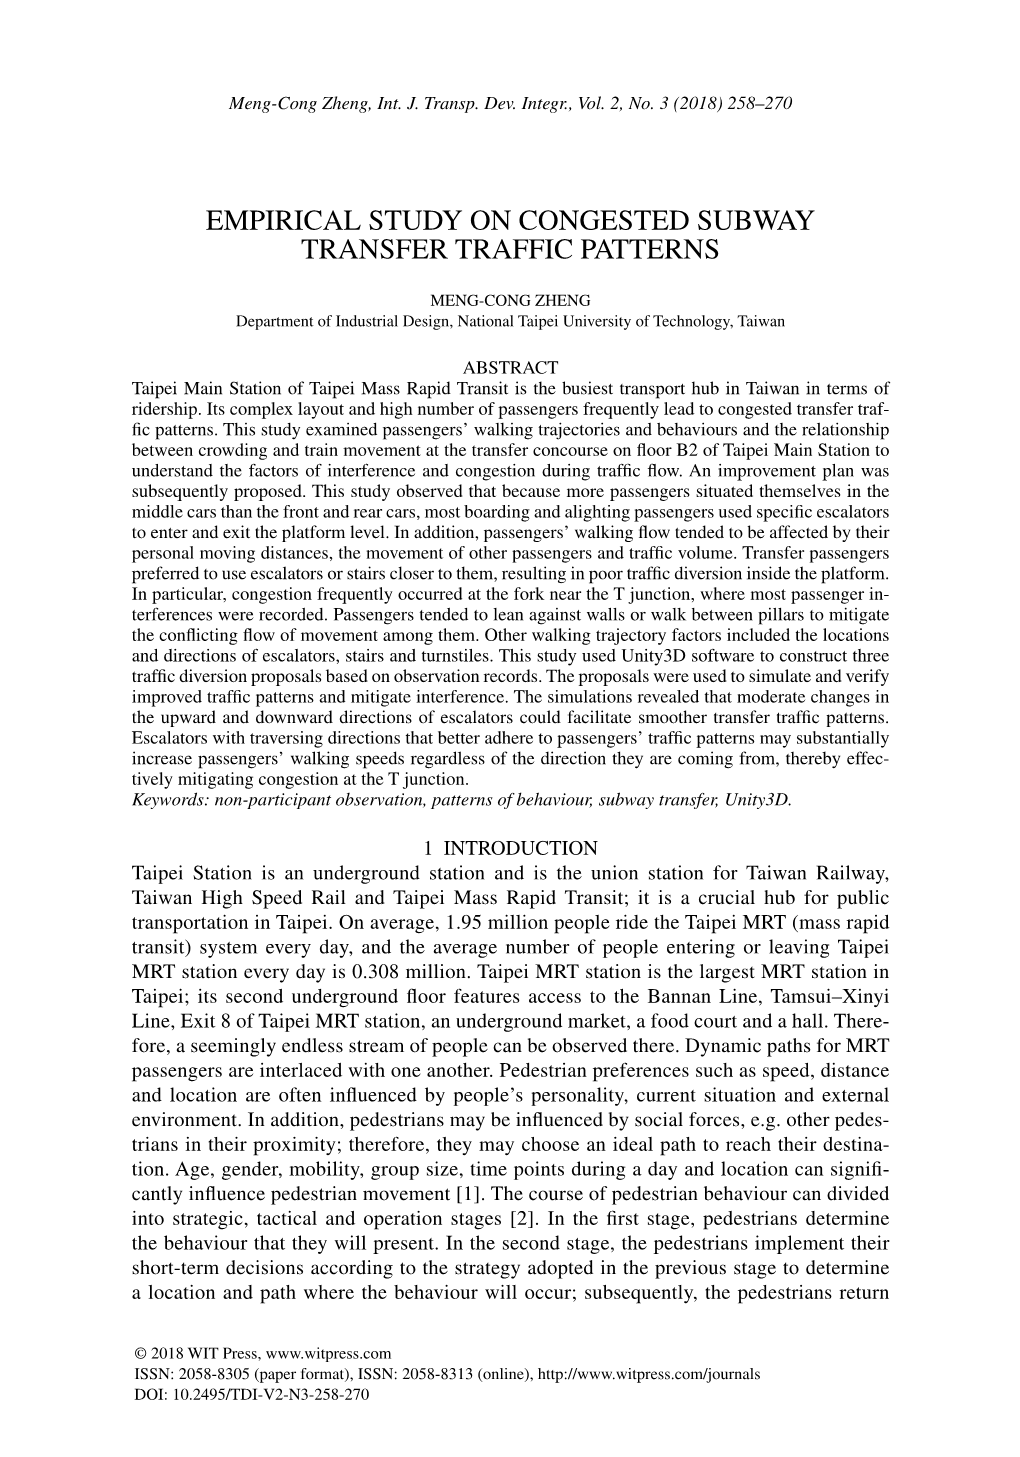 Empirical Study on Congested Subway Transfer Traffic Patterns